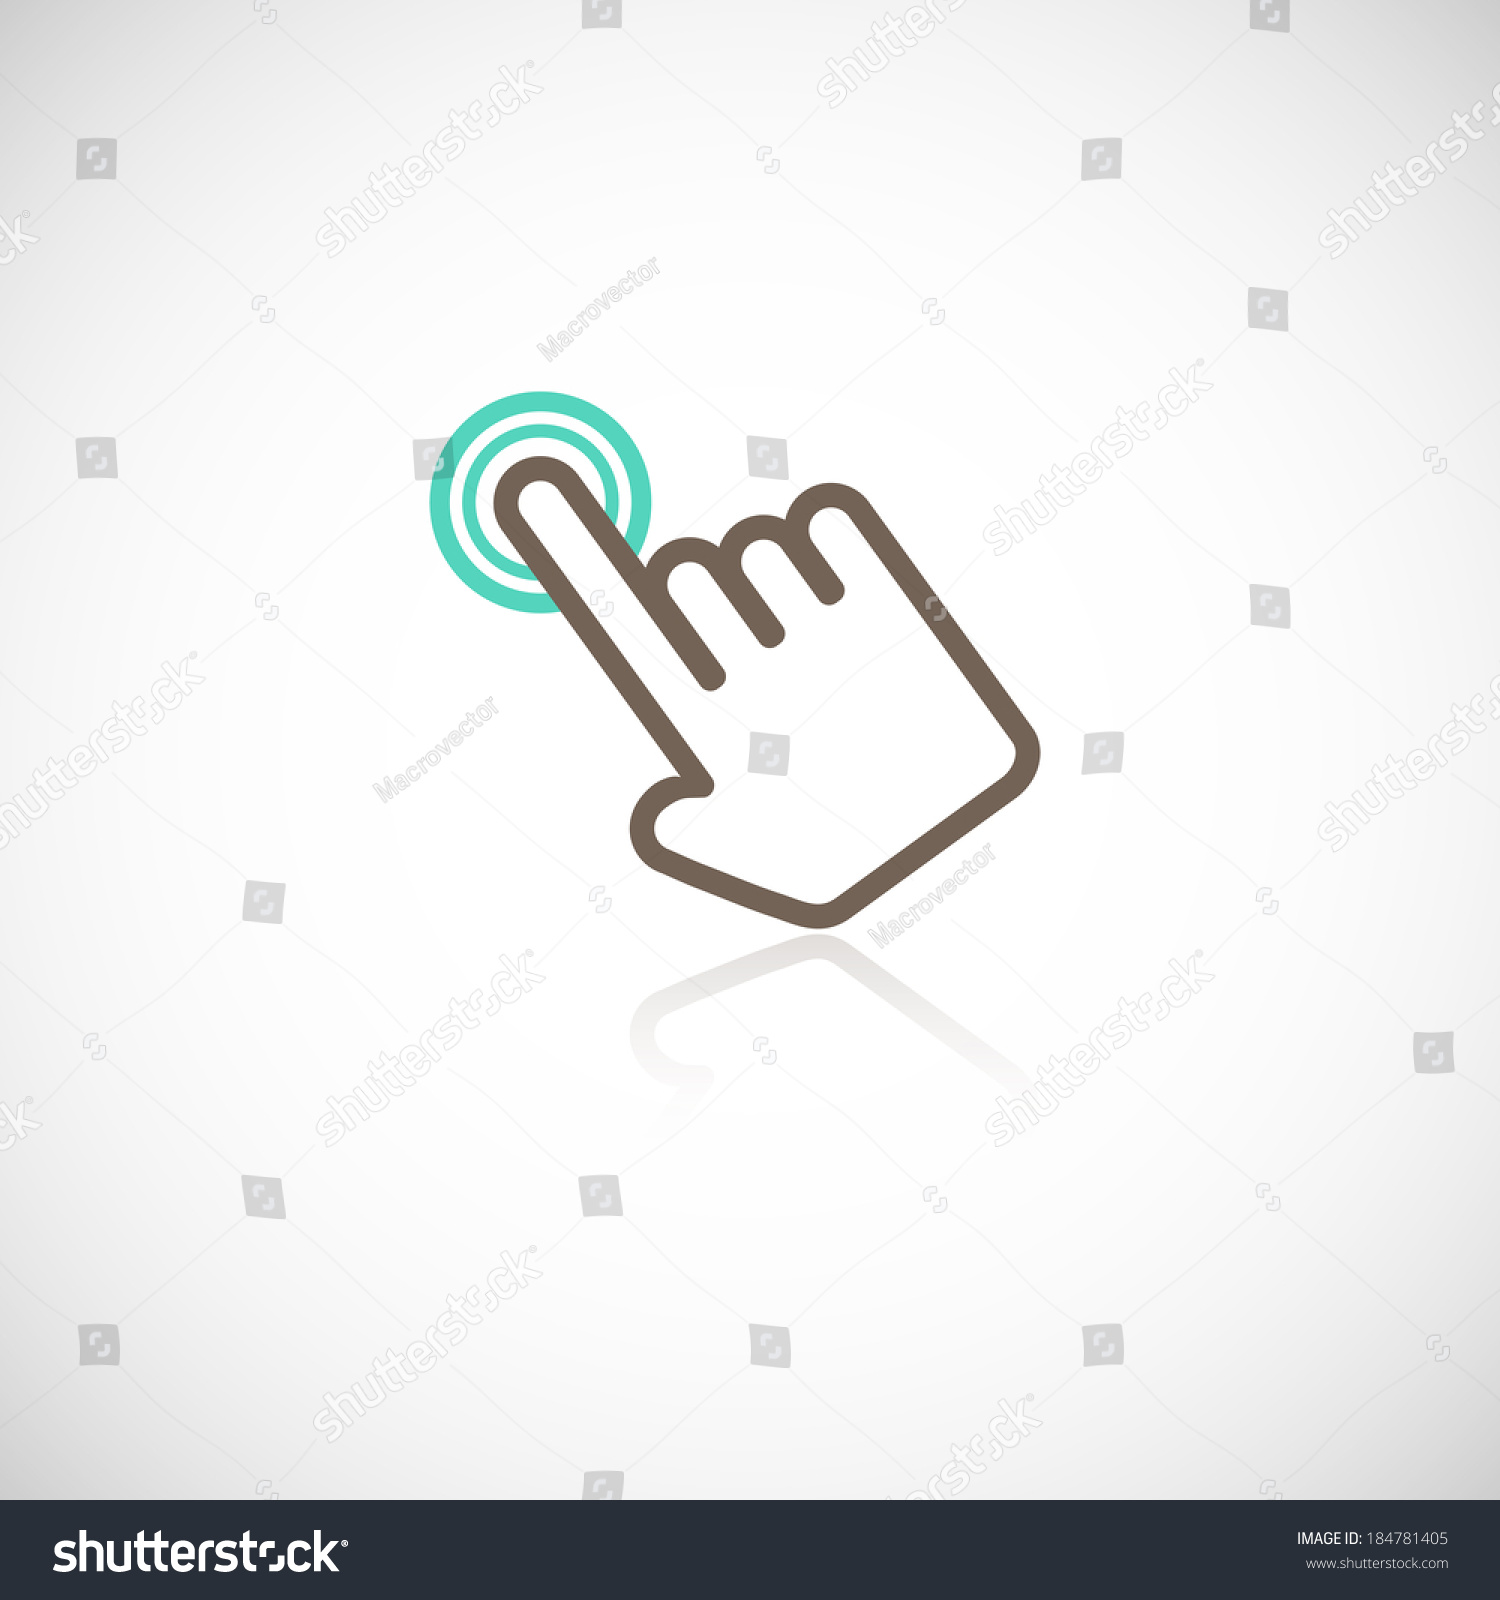 SVG of Hand with touching a button or pointing finger sign emblem vector illustration svg